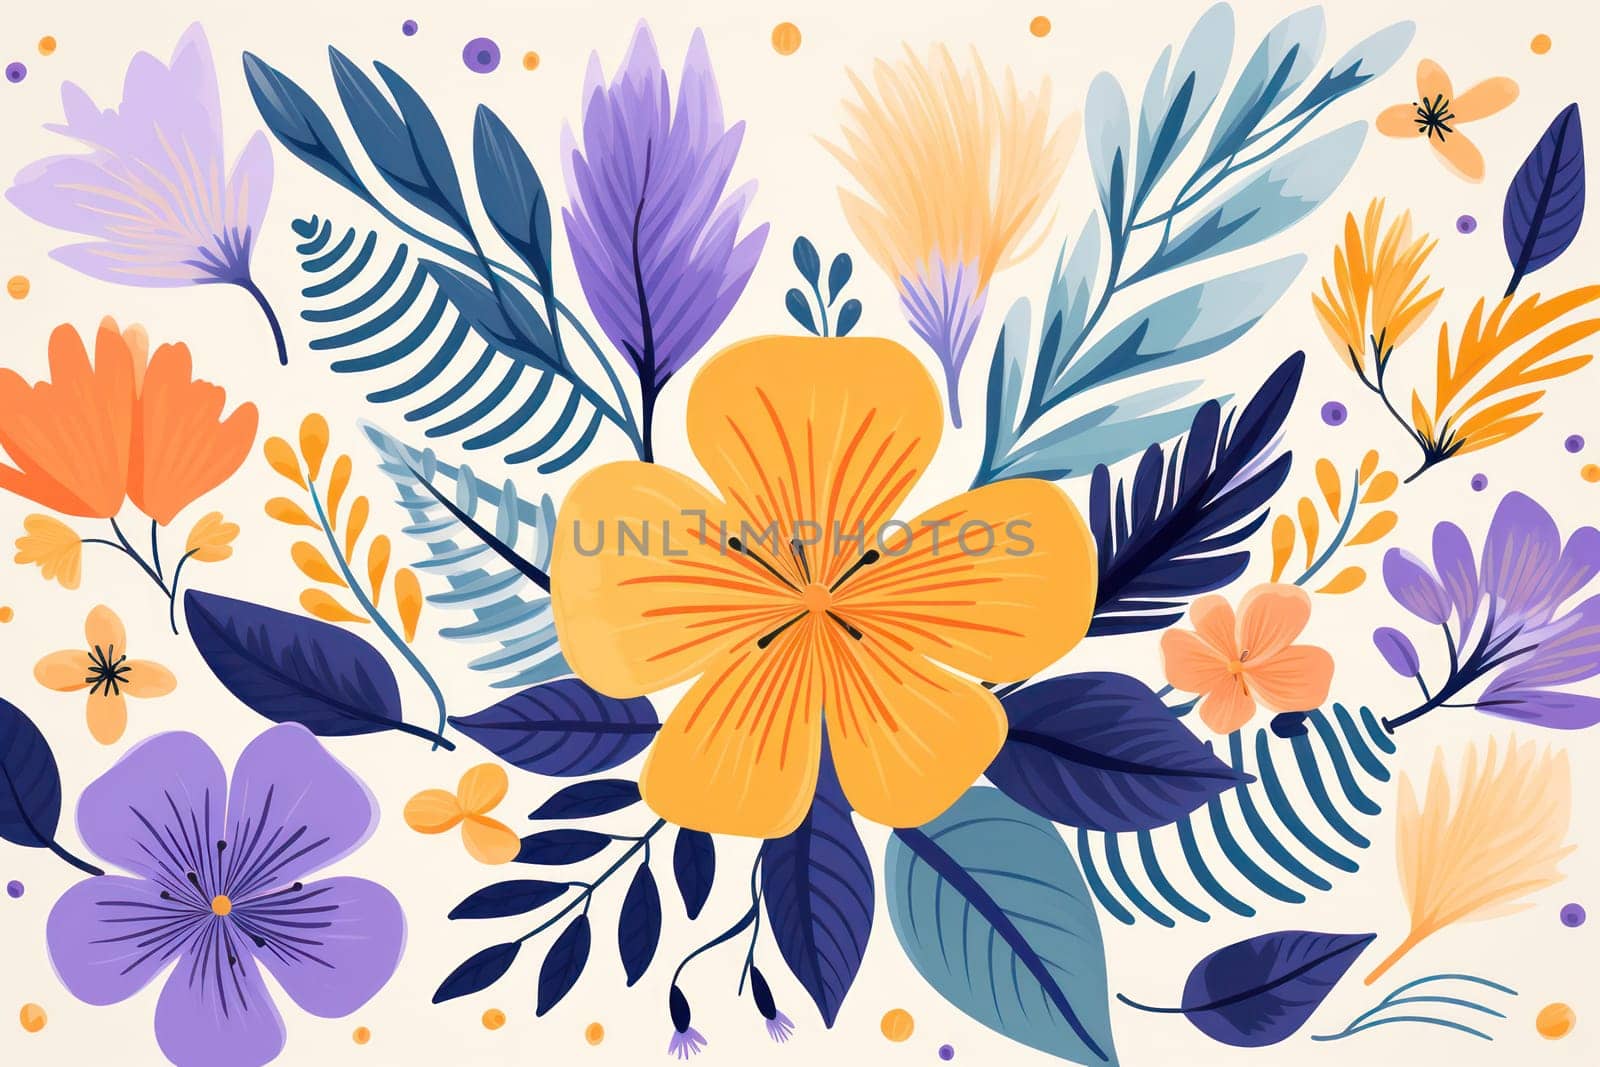 Botanical Bliss: A Colorful Floral Paradise on a Vintage Blue Wallpaper by Vichizh